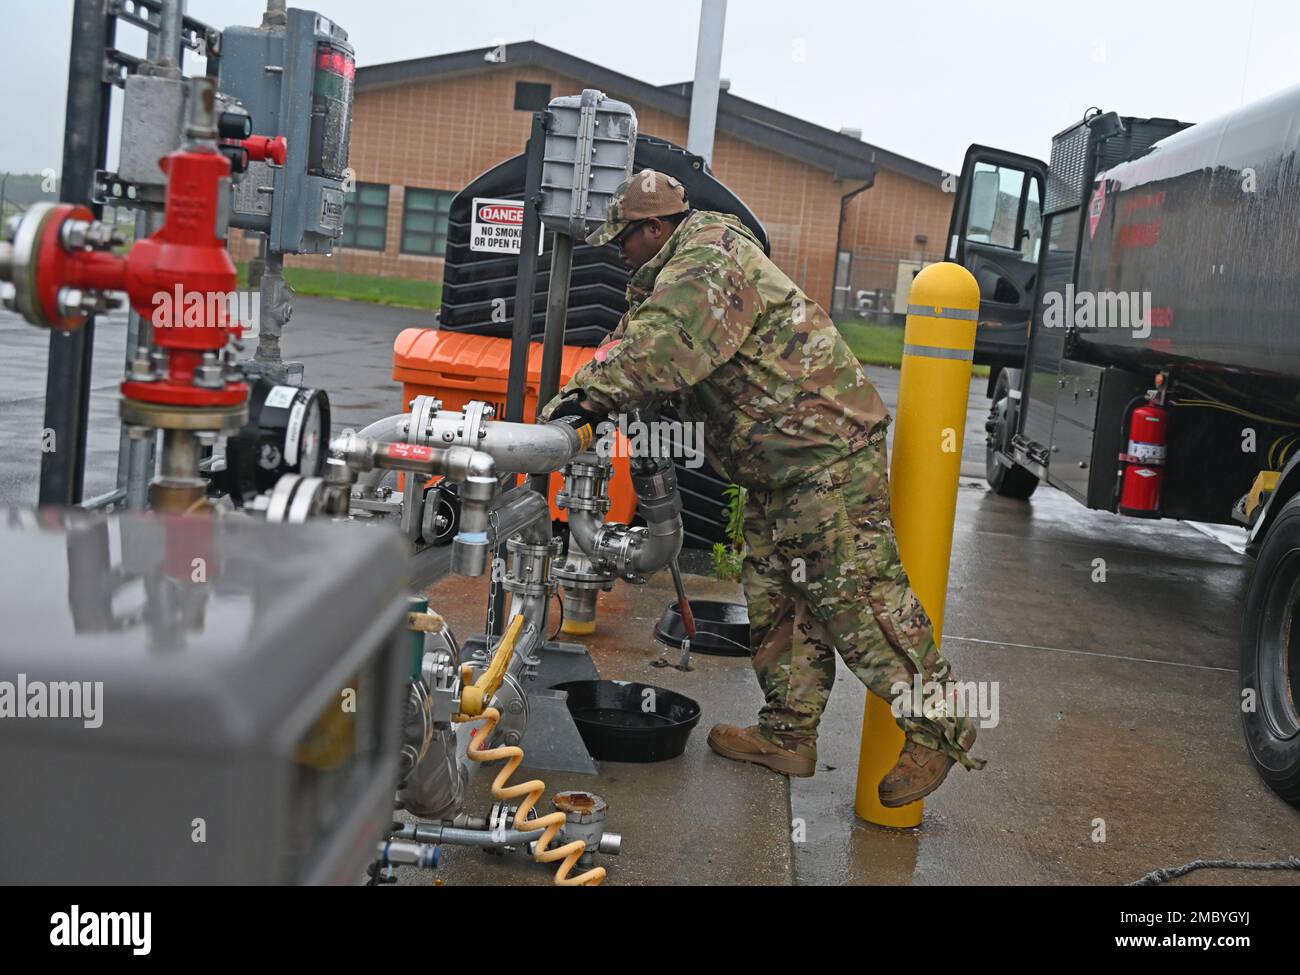 U.S. Air Force Staff Sgt. Terence Bowe, a fuels craftsman assigned to the 175th Mission Support Group, Maryland Air National Guard, puts away equipment after filling up a fuel truck at Warfield Air National Guard Base, Middle River, Md., June 23, 2022. Nearly 1,500 Airmen are assigned to the 175th Wing and serve in a wide range of career fields, like cyber, civil engineering, aircraft maintenance, logistics, intelligence, medical, security, administration, and more. Stock Photo